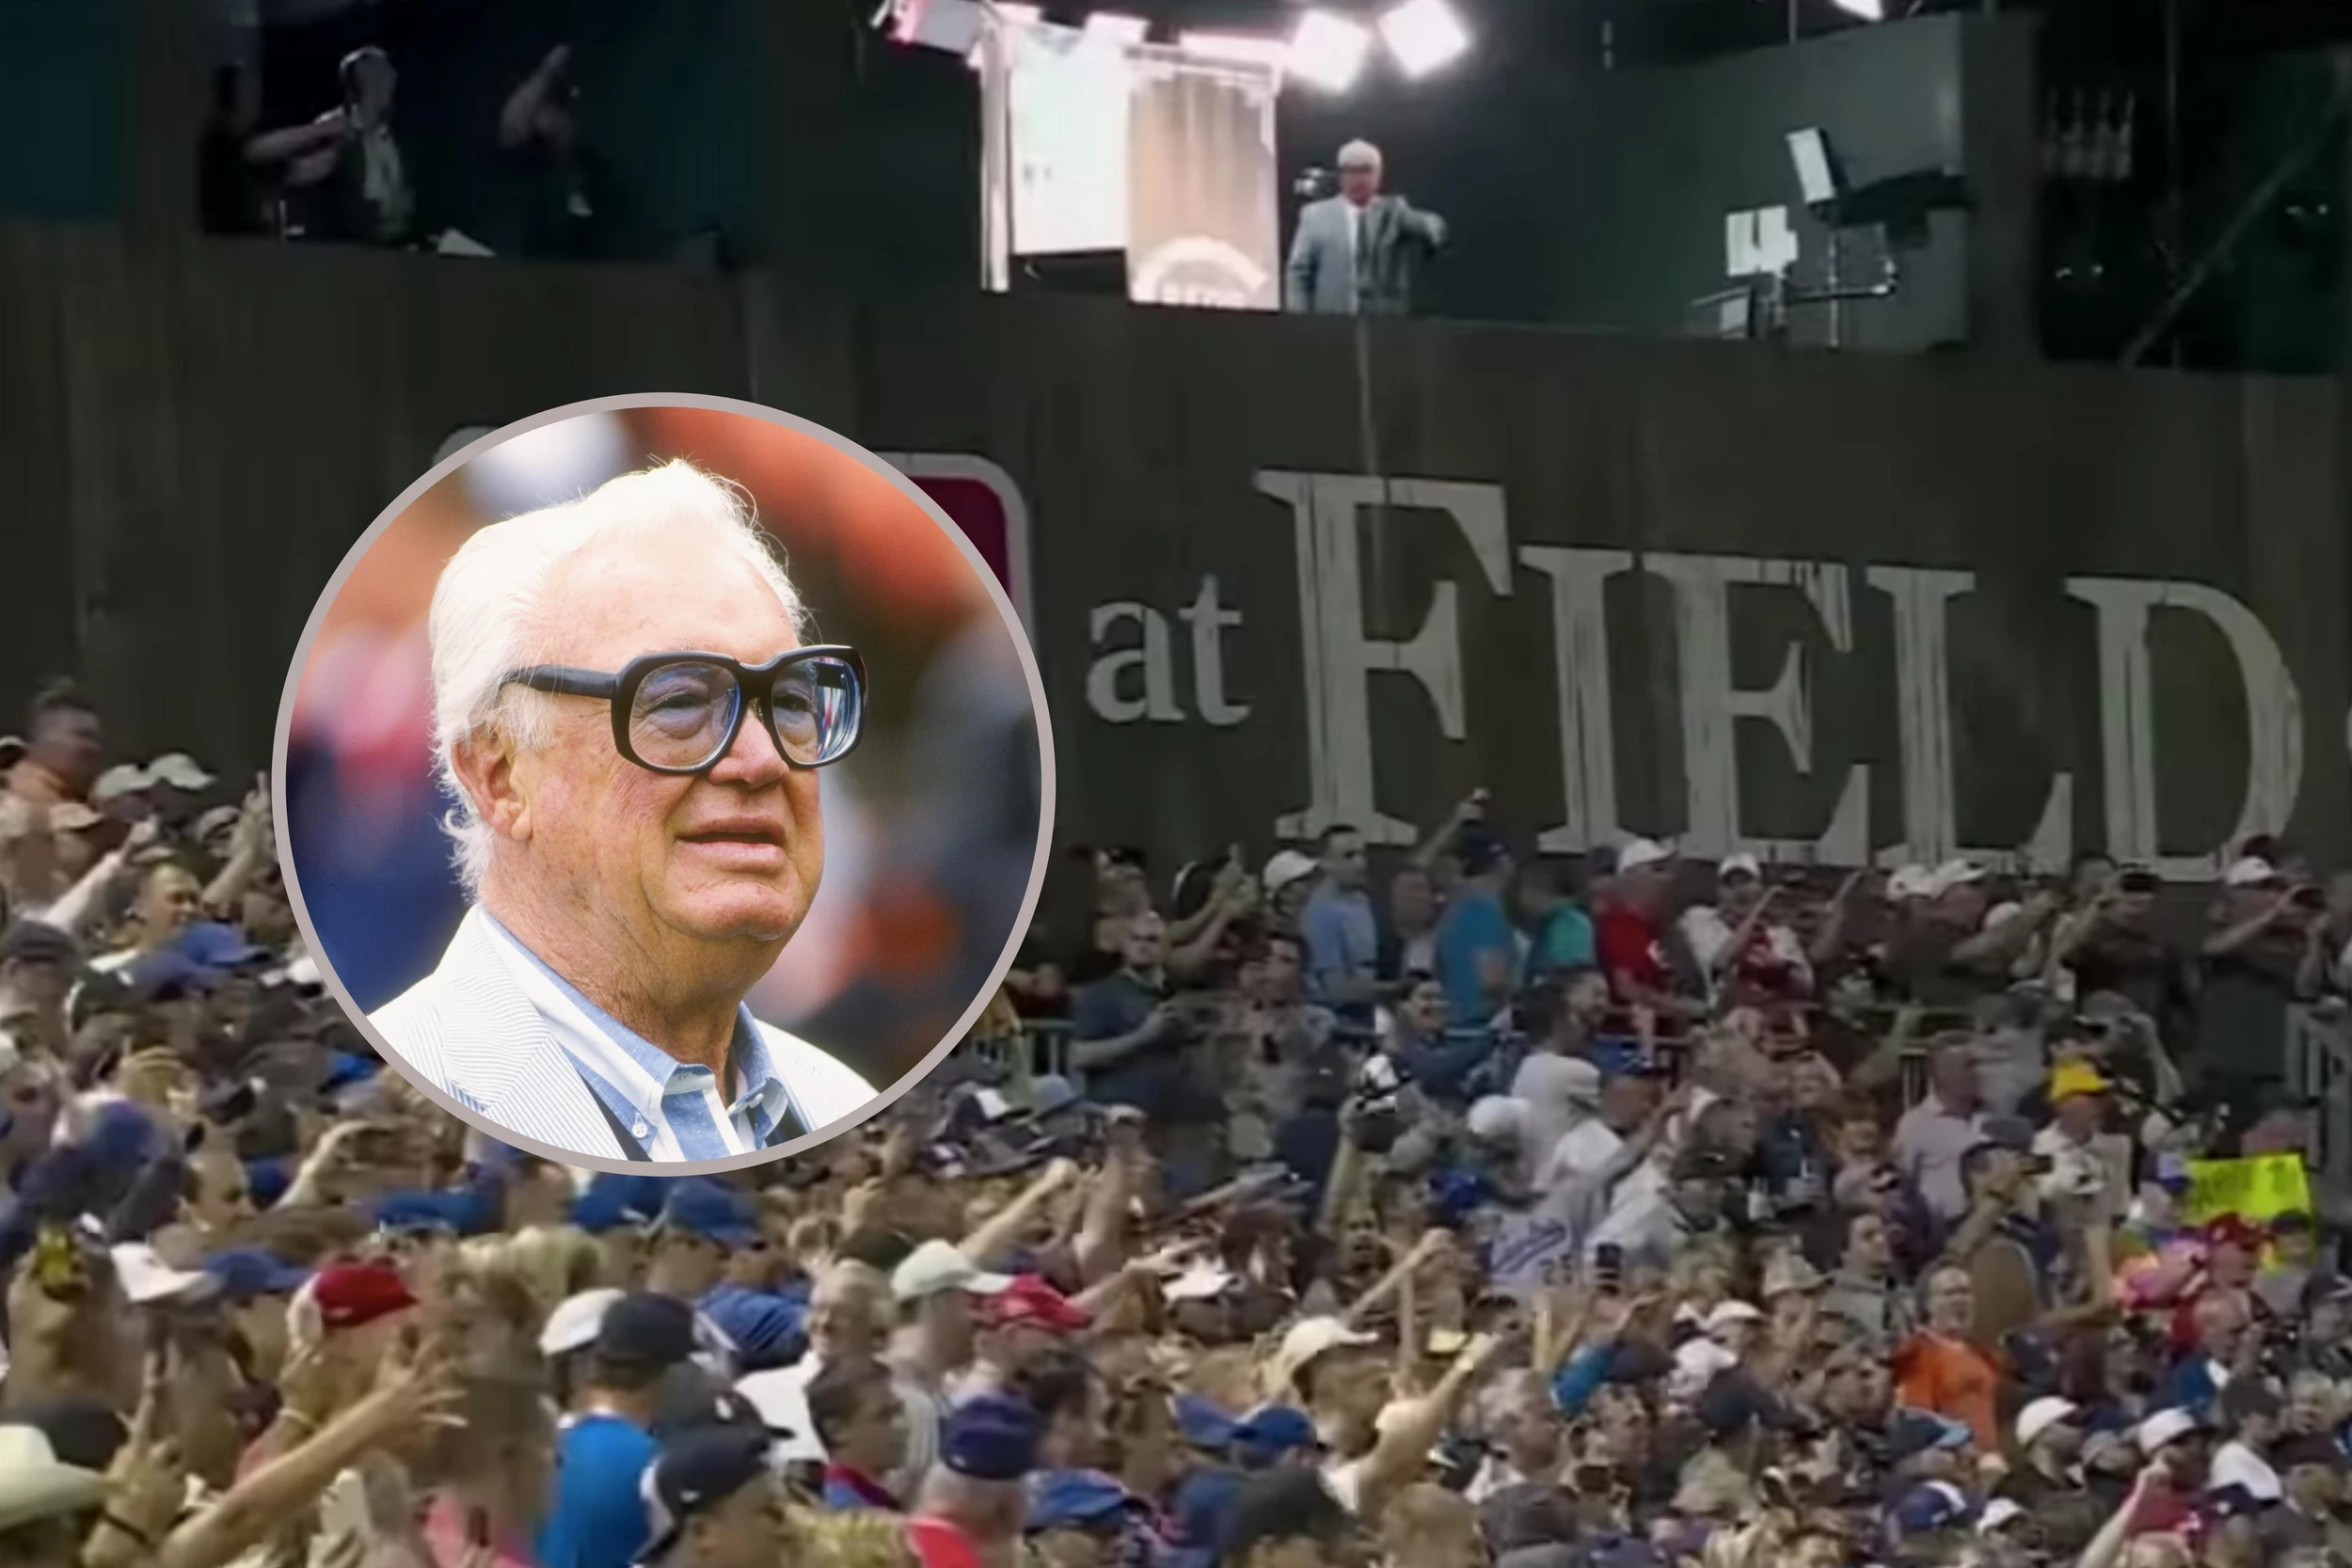 Fox's Harry Caray hologram during 'Field of Dreams' game is big